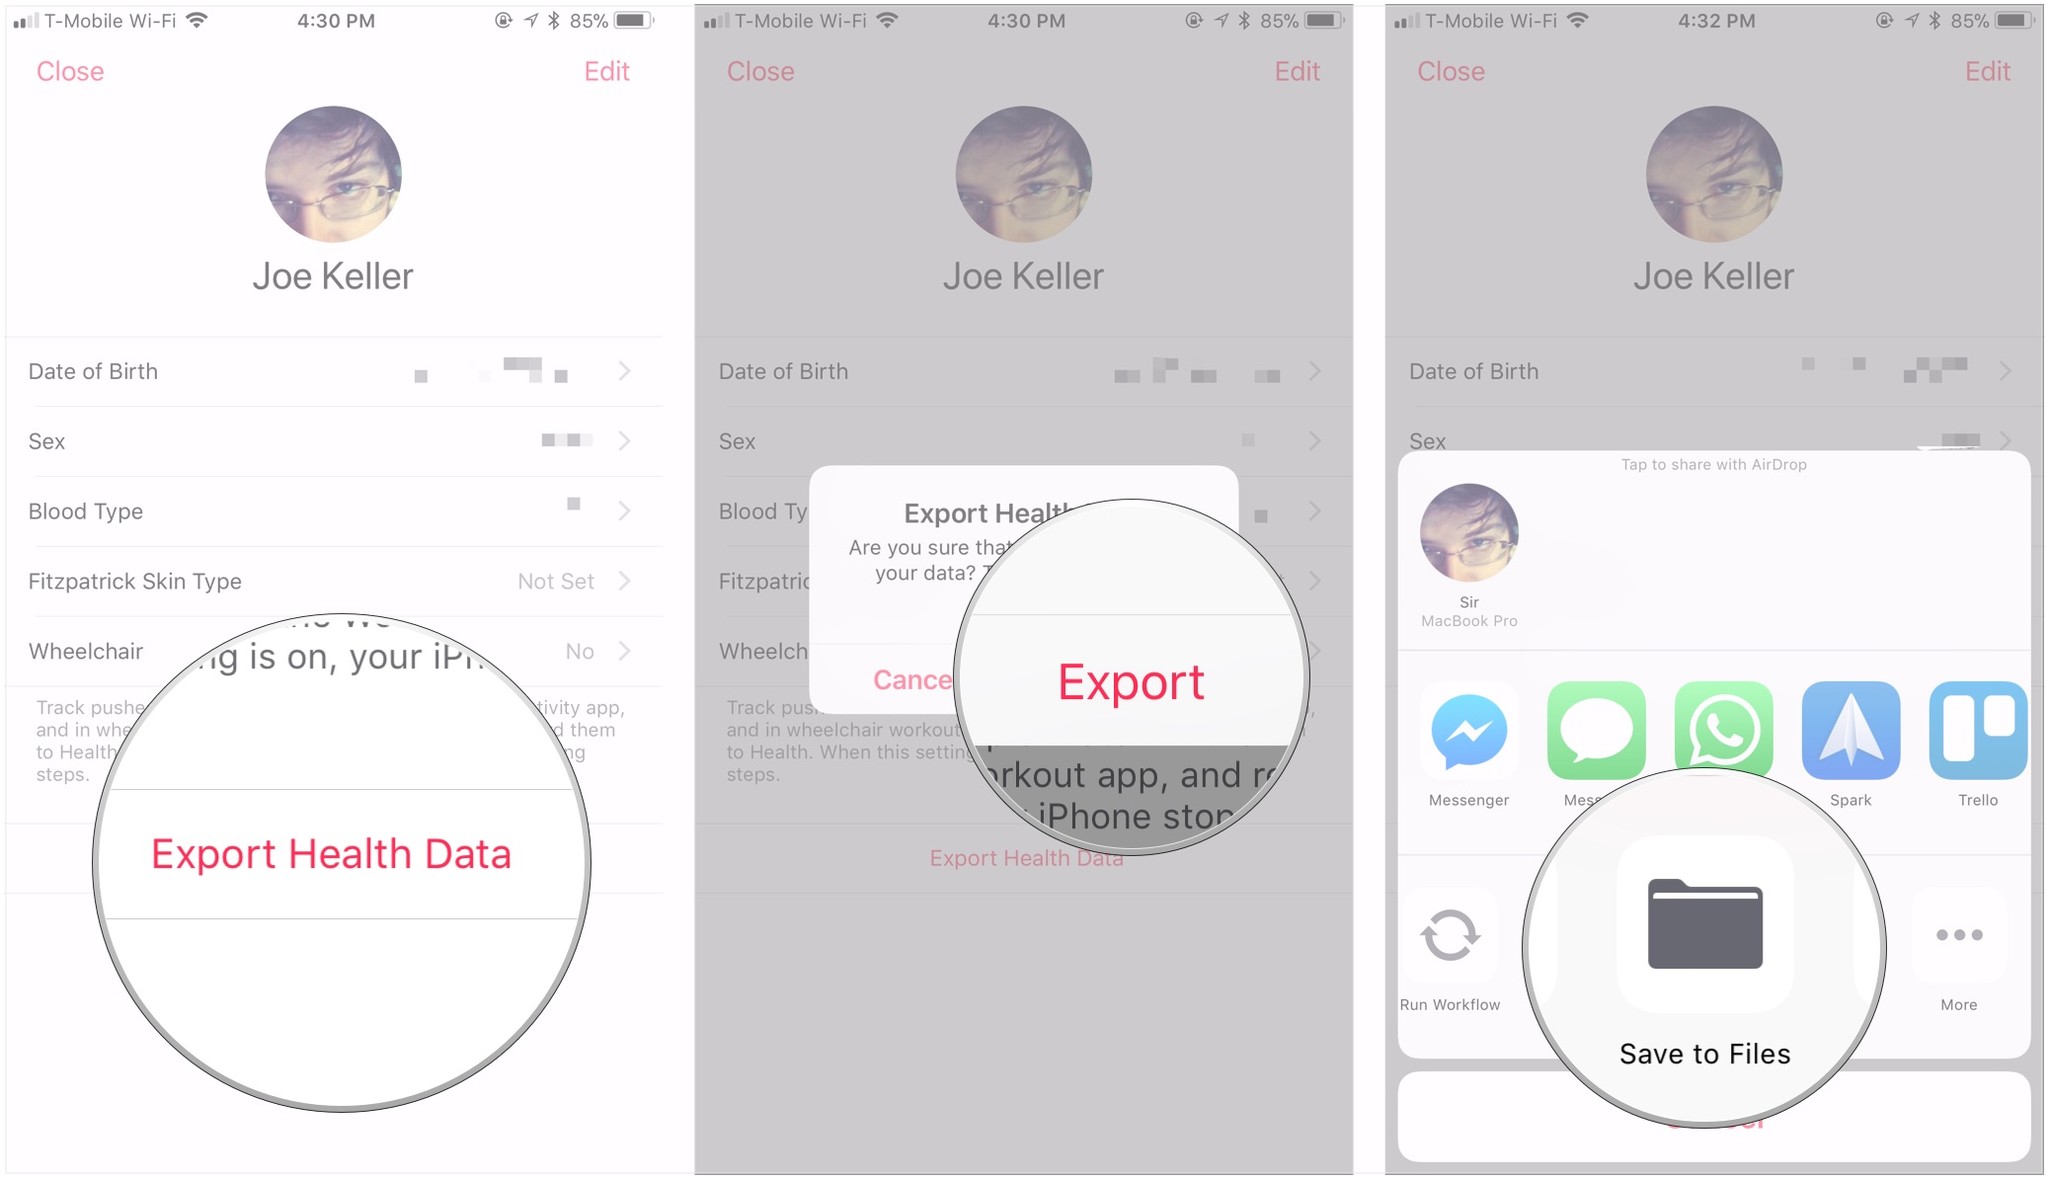 Tap Export Health Data, tap Export, save to Files